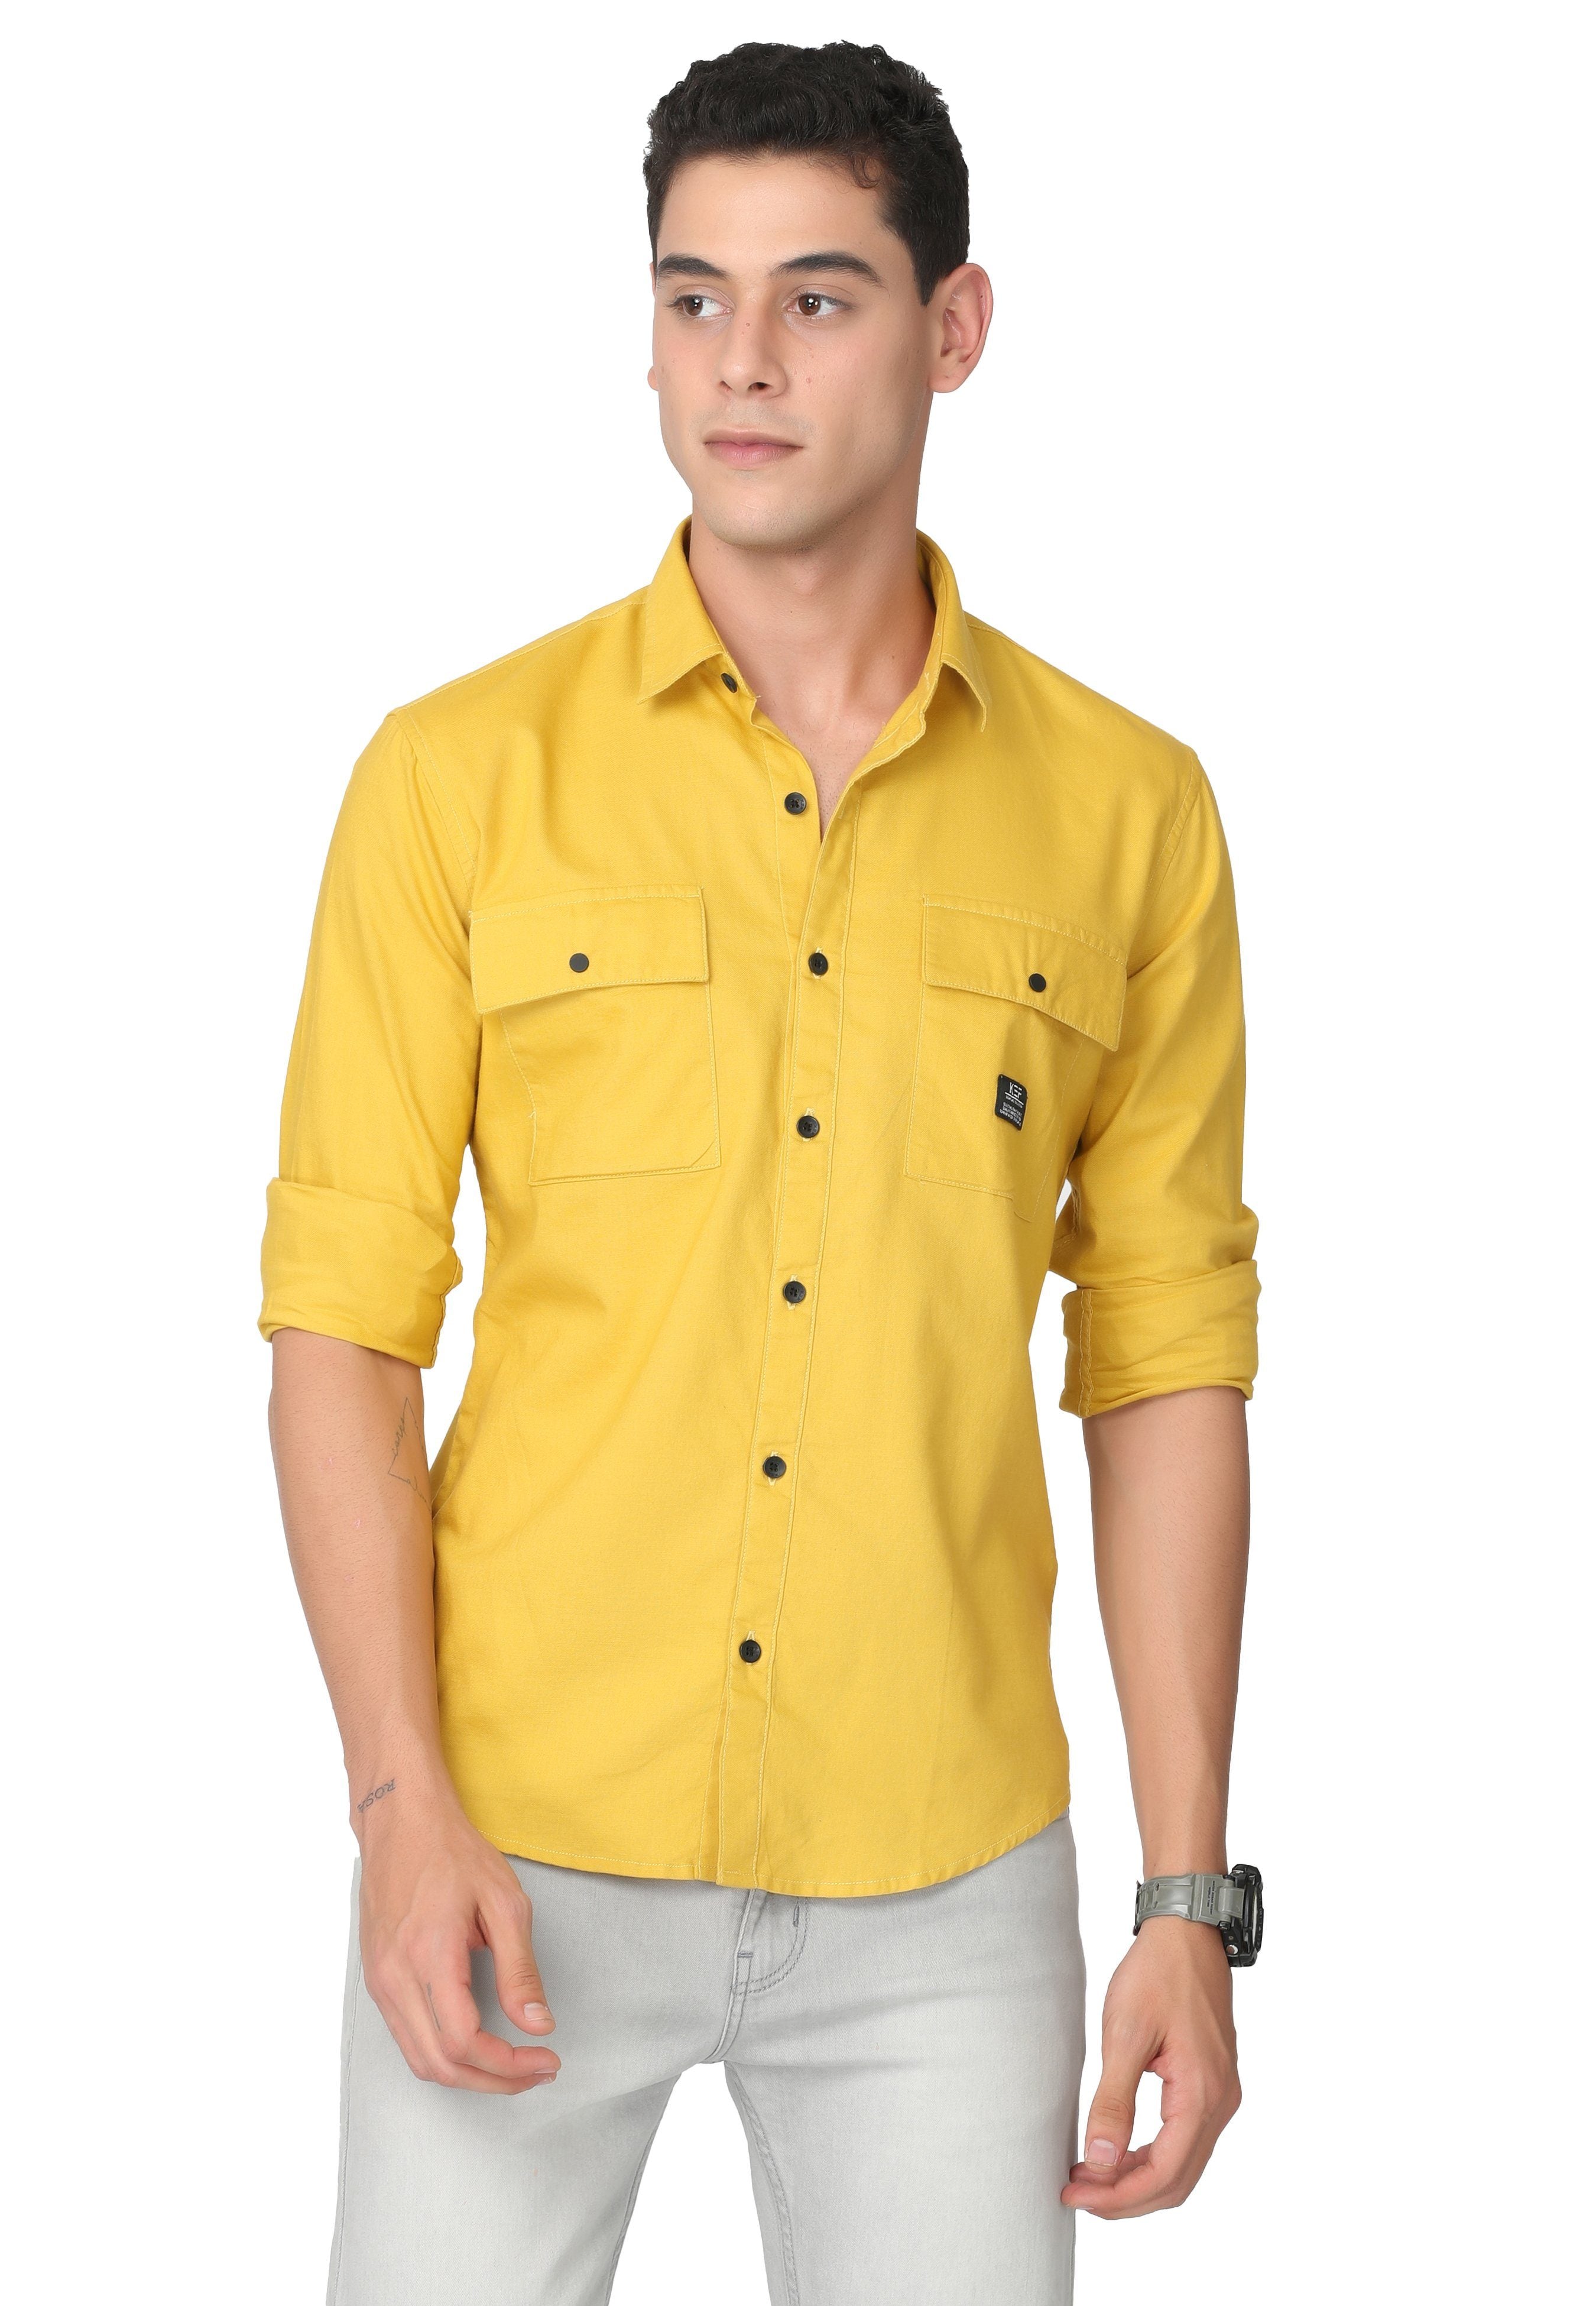 Glowing Yellow Solid Oxford Casual Shirt Shirts KEF S 